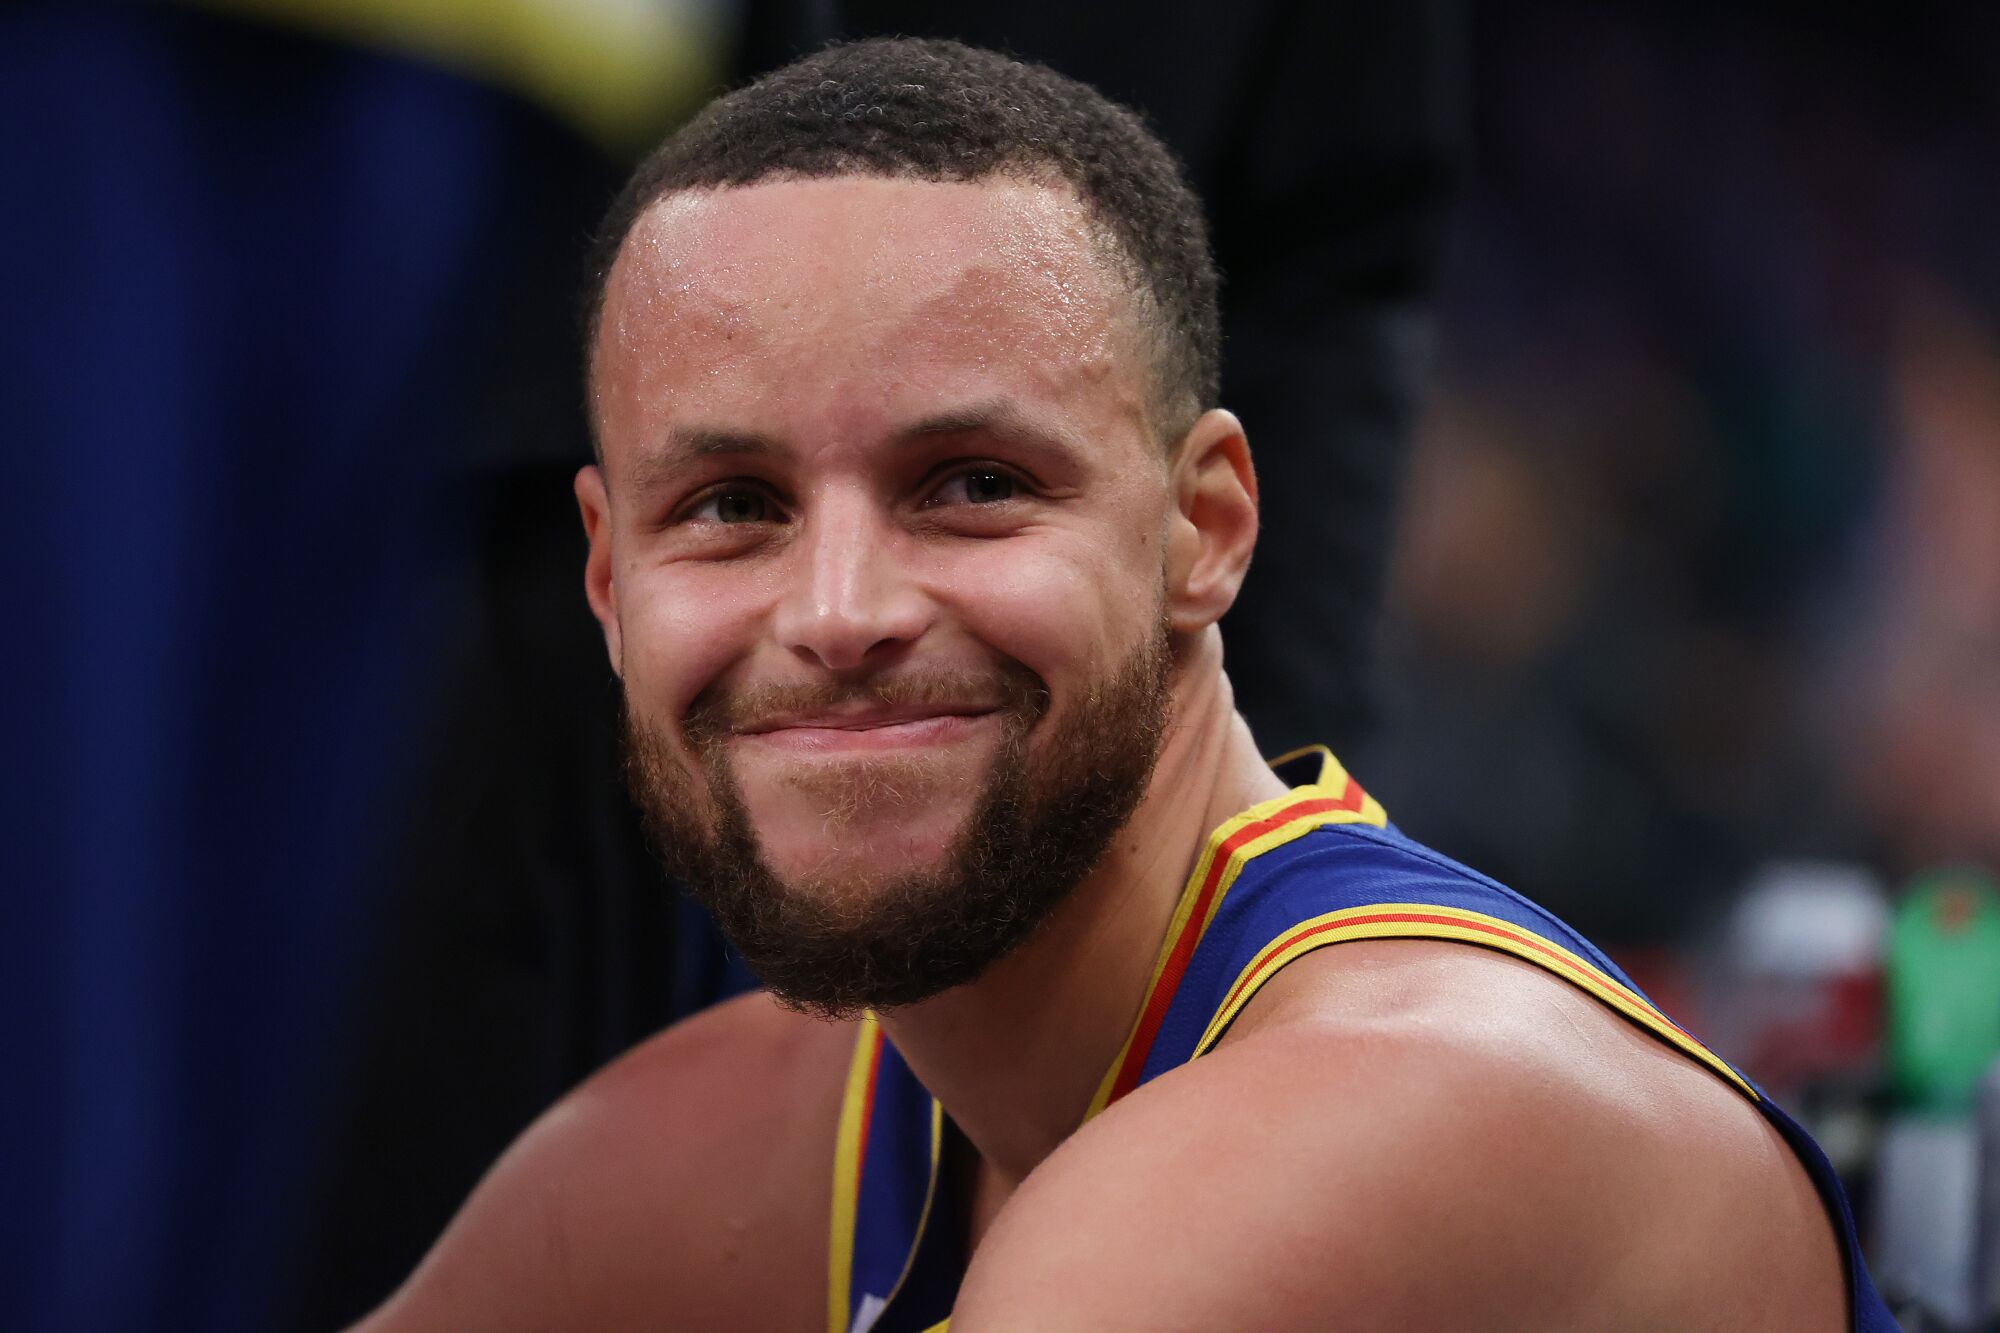 Stephen Curry smiles from the bench after making a three-point basket to break Ray Allen’s record.